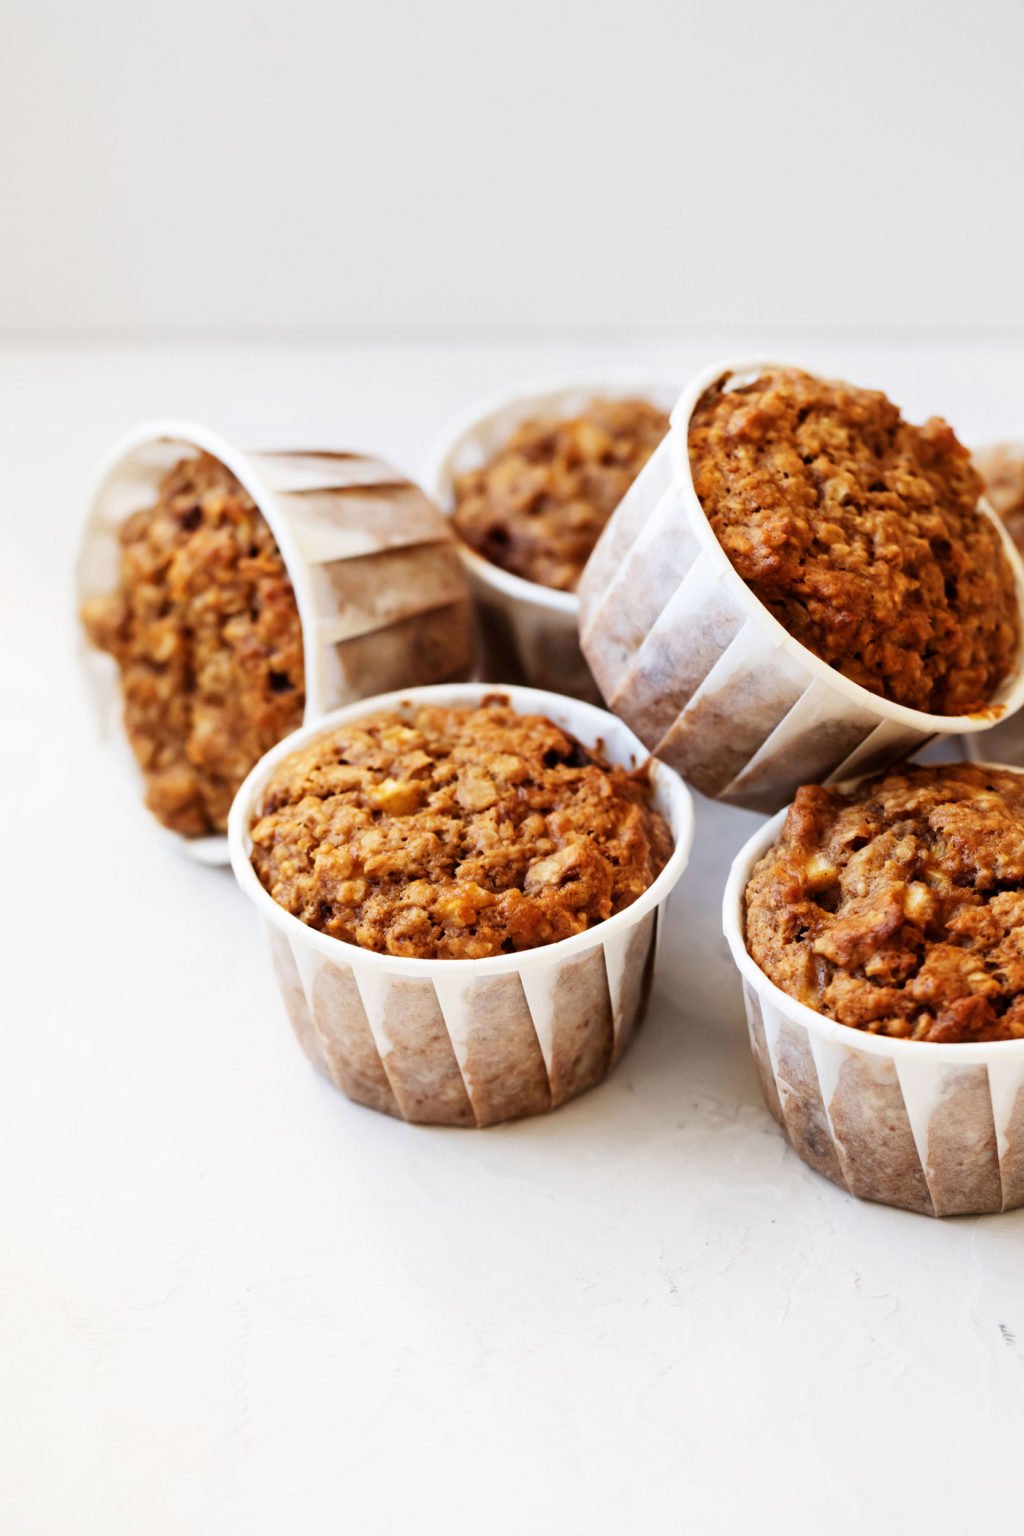 Six vegan apple bran muffins are stacked on a white surface. Some muffins are upright, while others lie sideways.